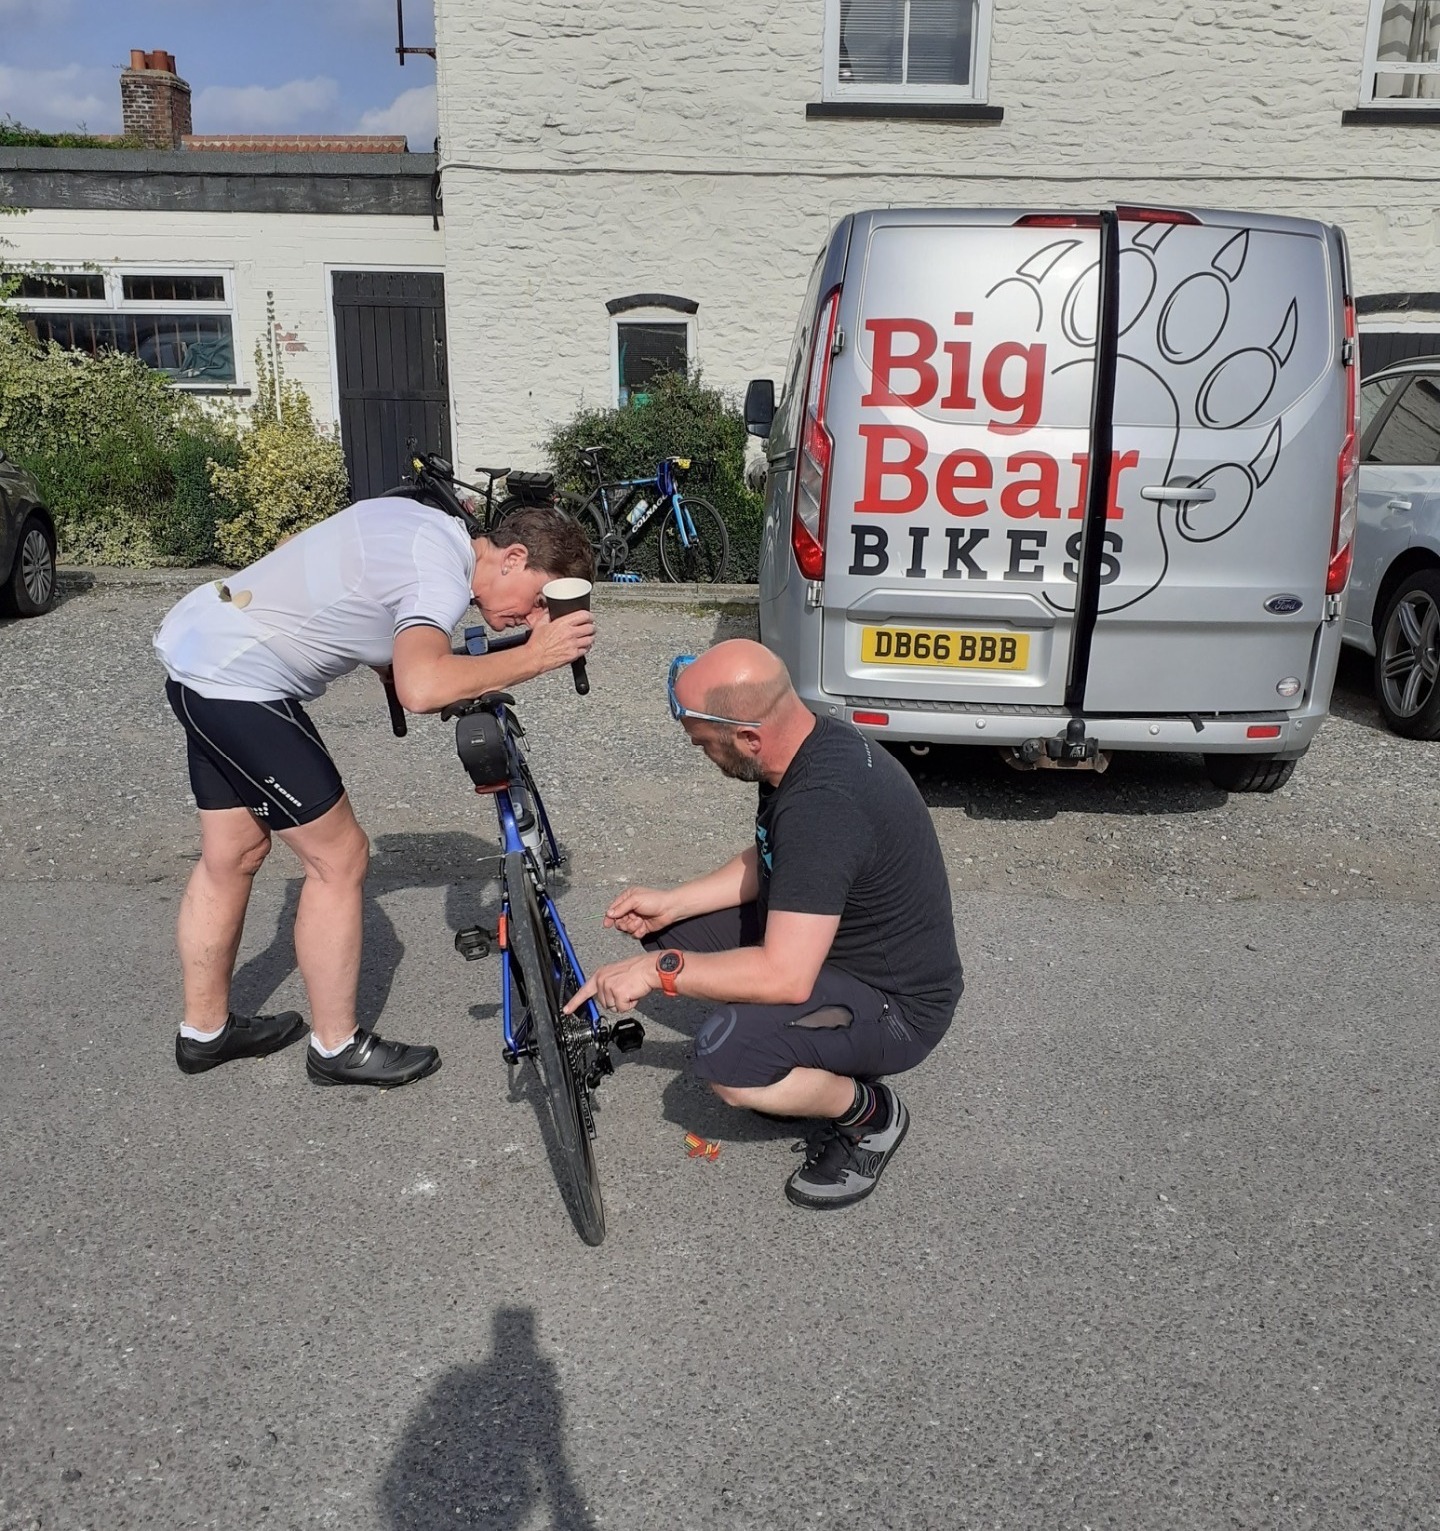 One of the Big Bear Bikes mechanics carrying out a repair